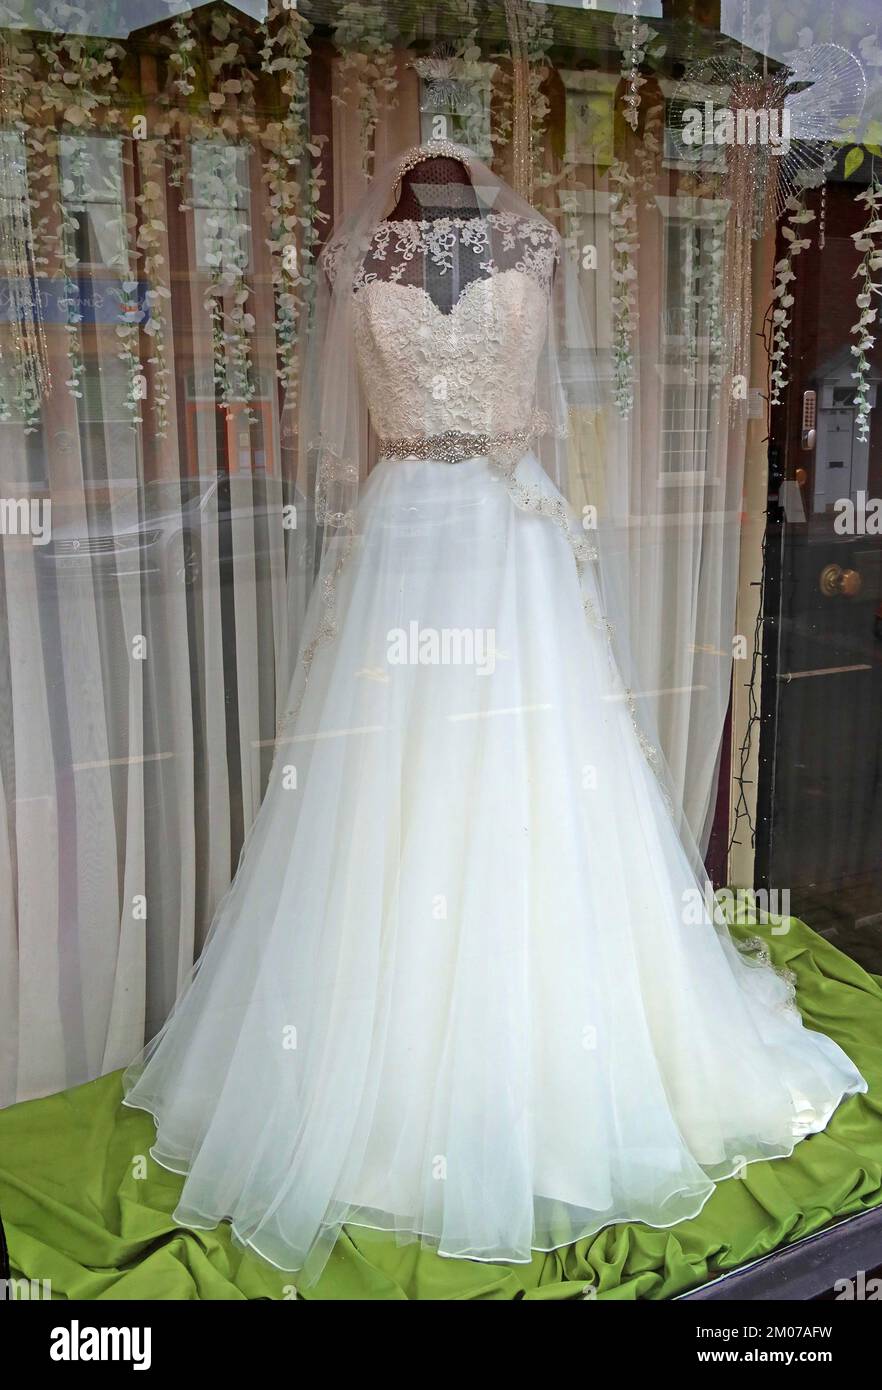 Robe de mariage blanche dans une vitrine, Hereford, Herefordshire, Angleterre, Royaume-Uni, HR1 2PR Banque D'Images